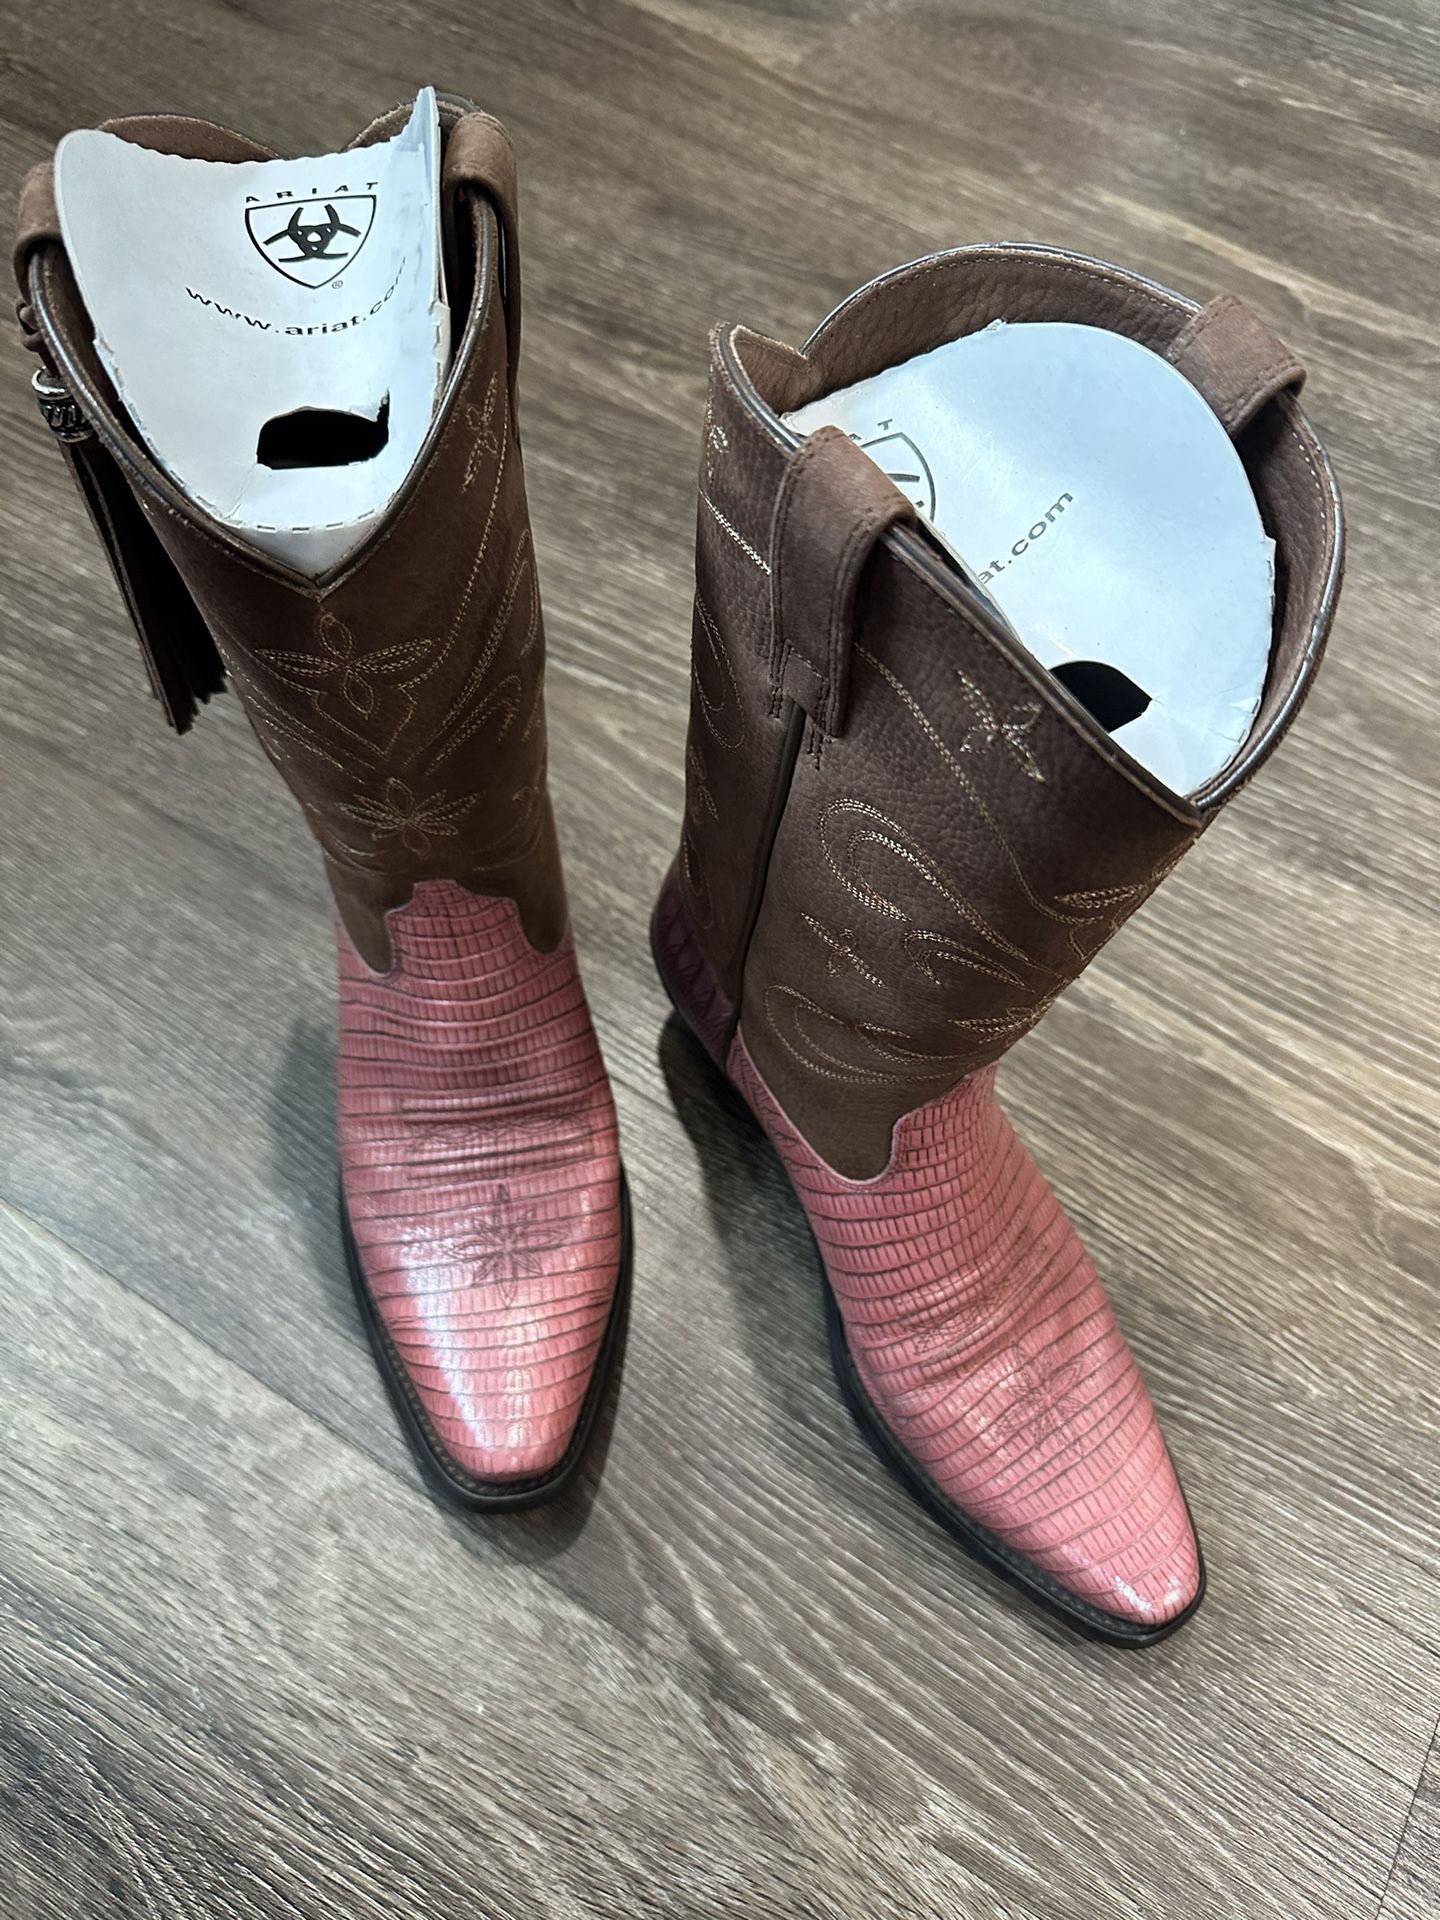 Ariat Pink Boots